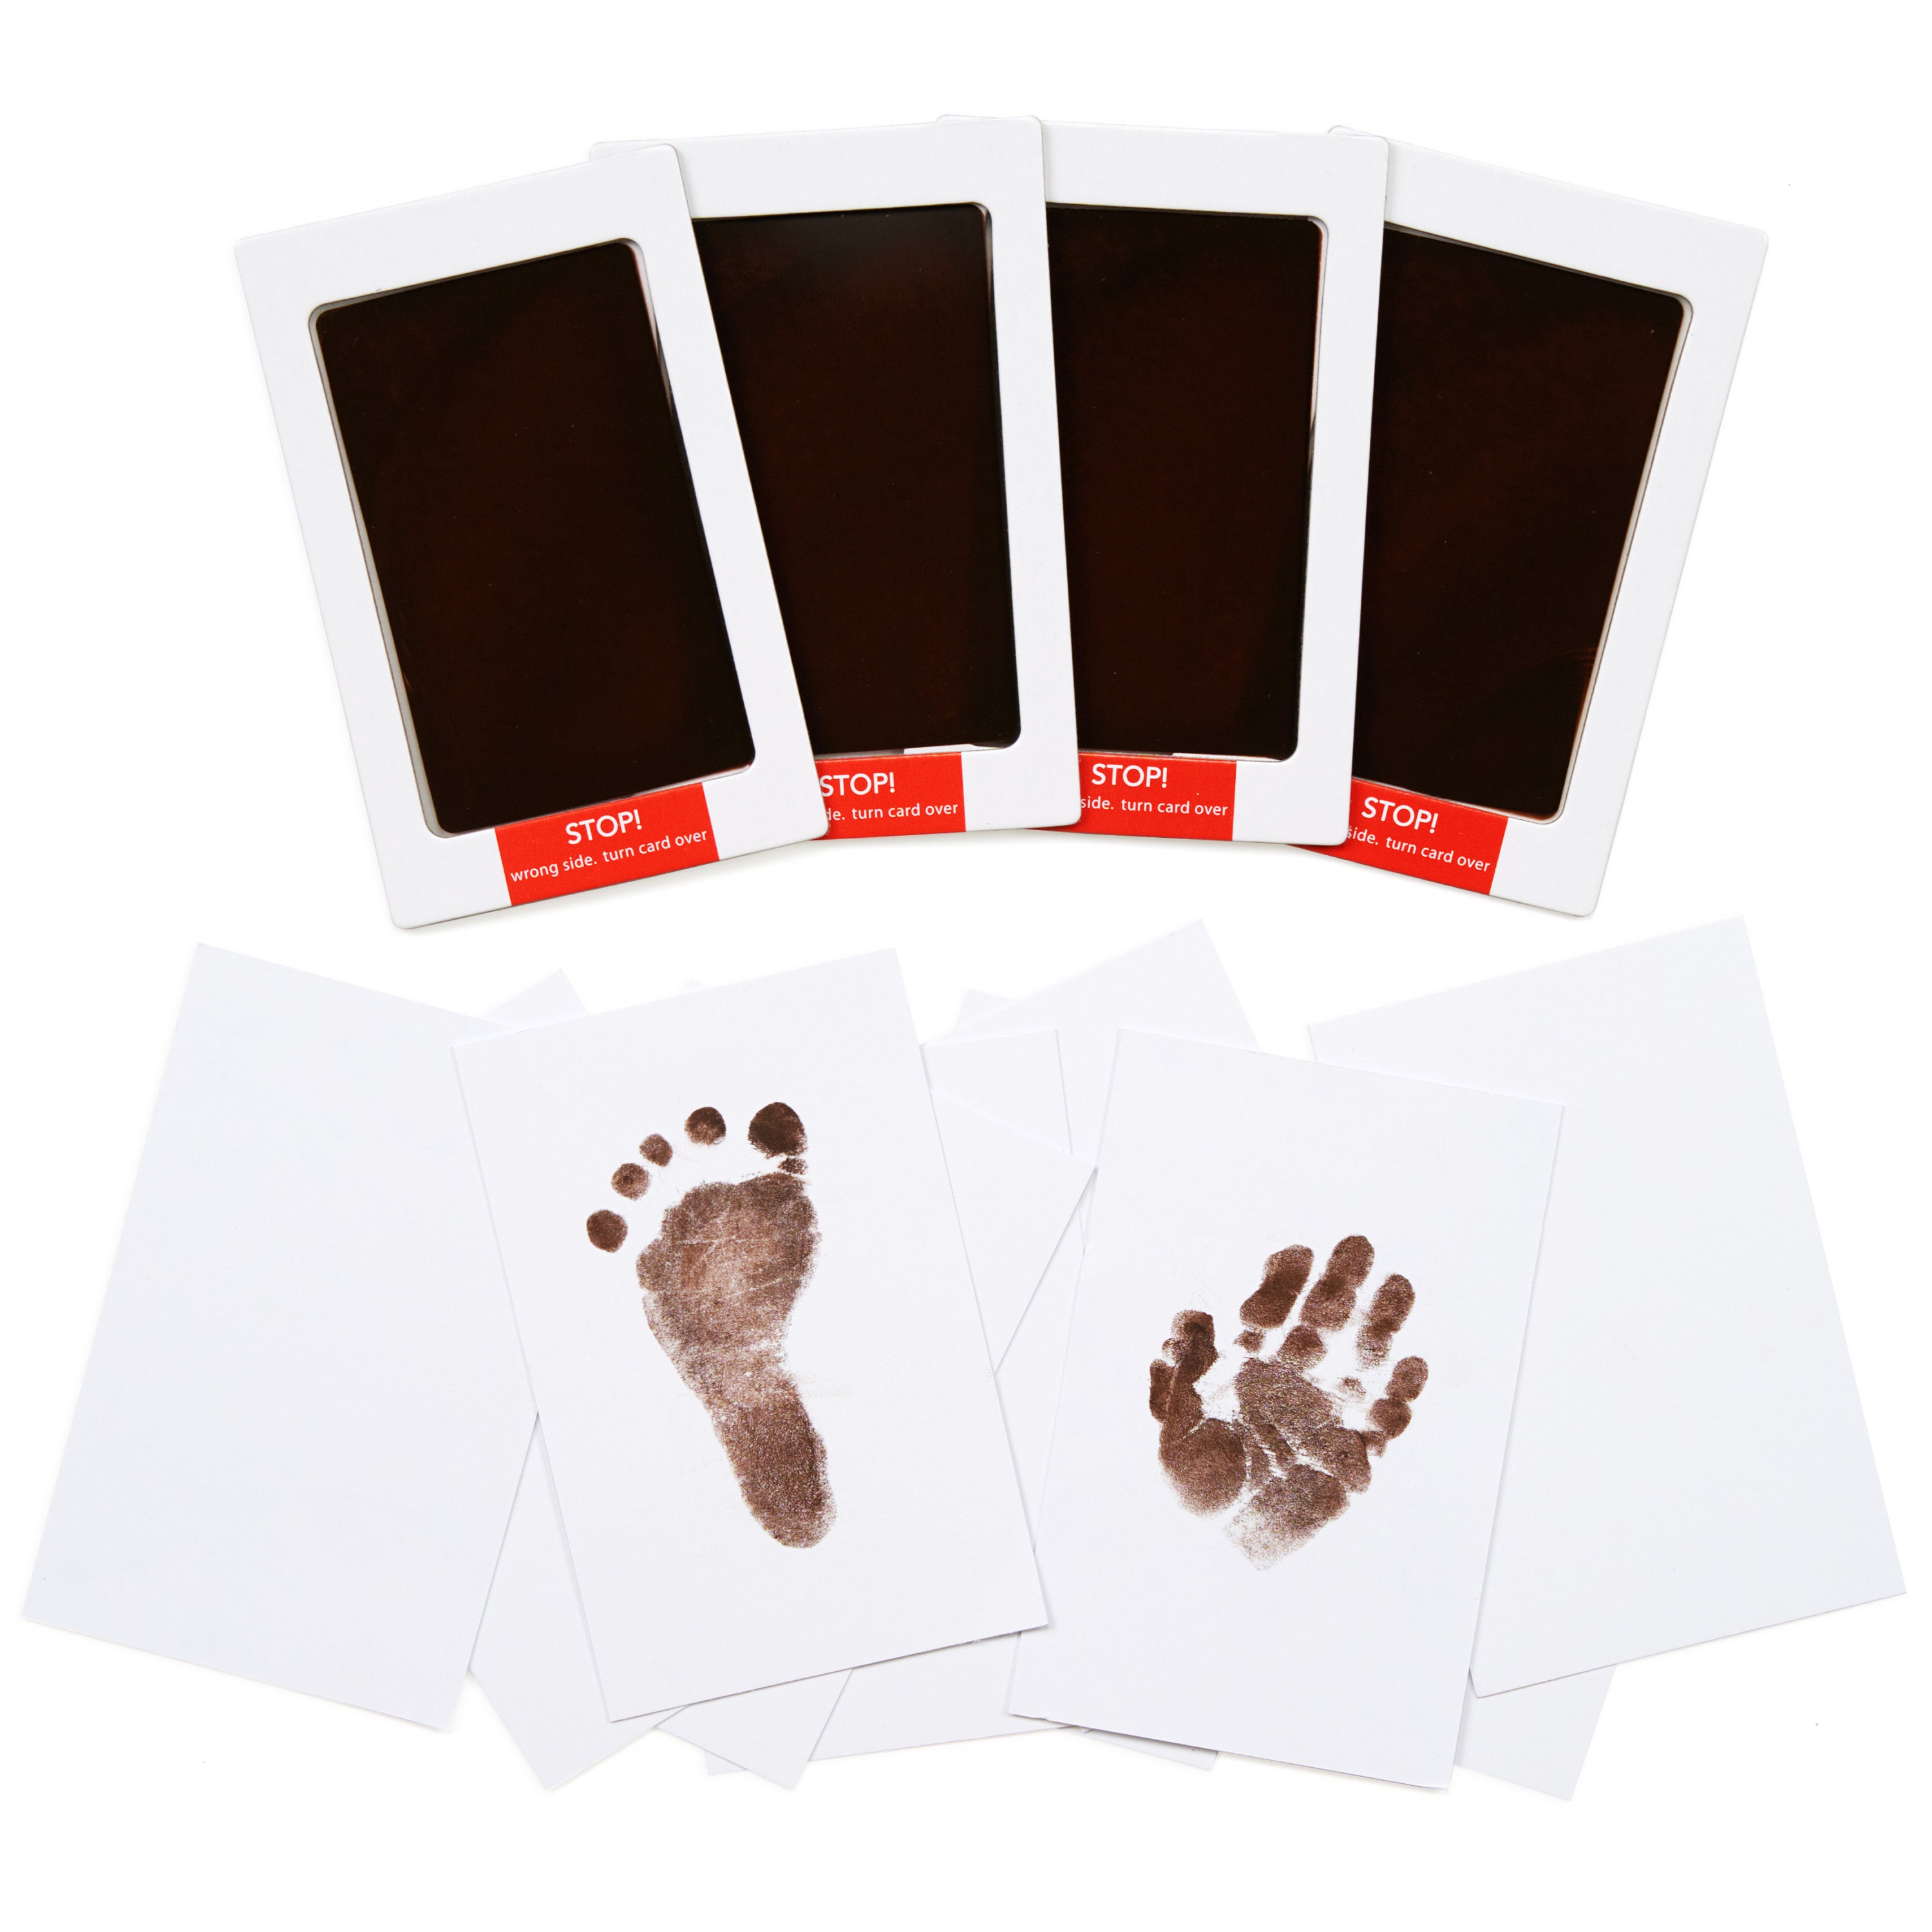 KeaBabies 4-Pack Inkless Hand and Footprint Kit - Ink Pad for Baby Hand and Footprints - Dog Paw Print Kit,Dog Nose Print Kit - Baby Footprint Kit, CL